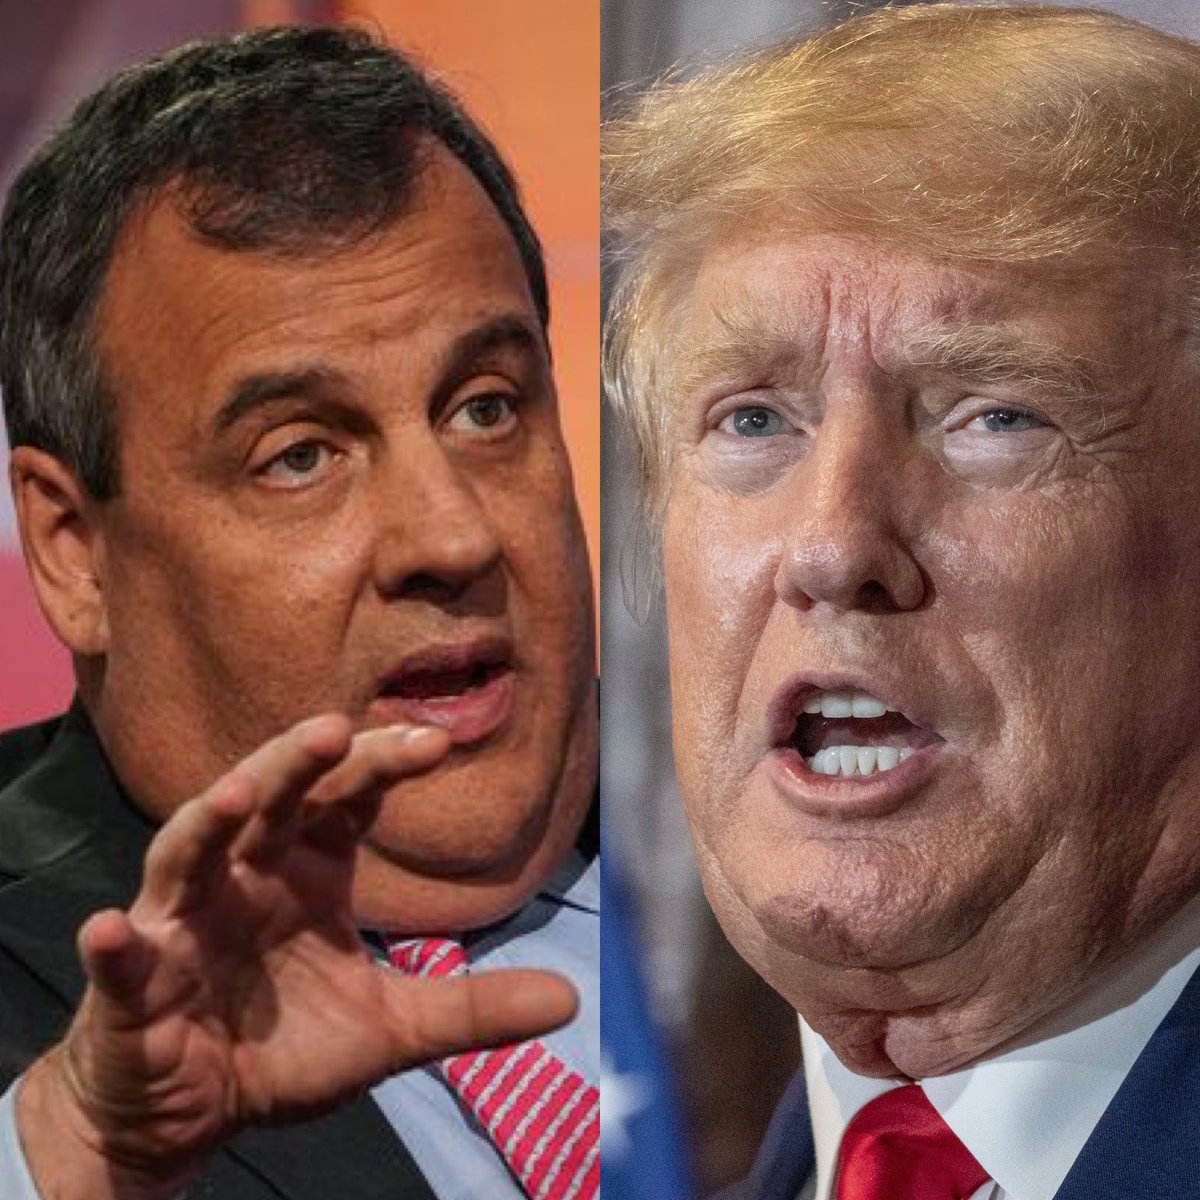 BREAKING: Republican candidate Chris Christie brutally roasts Donald Trump live on CNN for “hiding” behind his “failed social media site” Truth Social before launching into an epic rant. Digging deep under Trump’s thin skin, Christie said the indicted ex-president needs to “stop